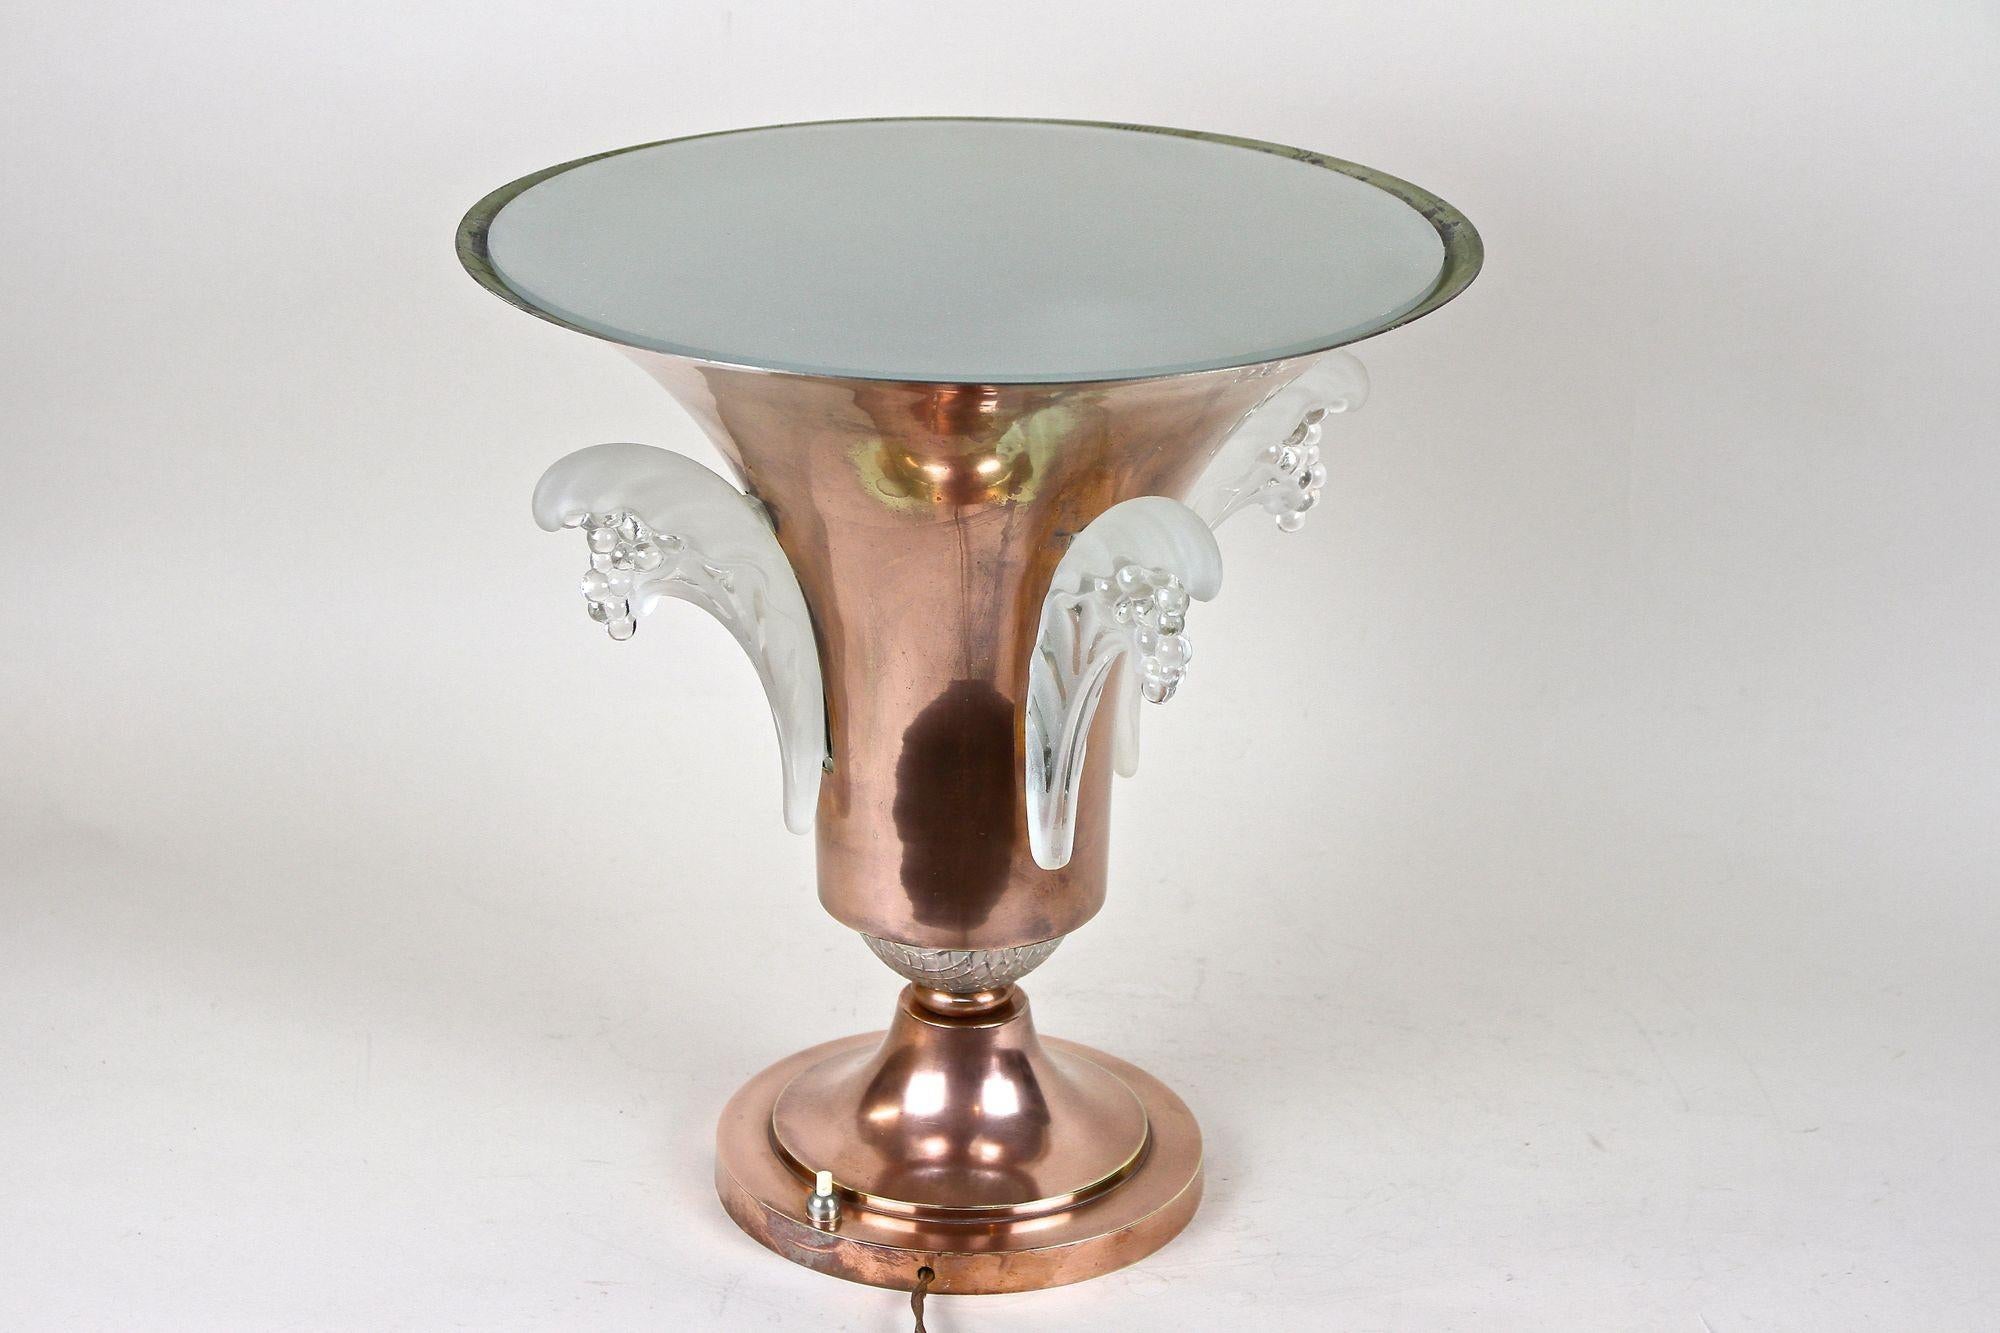 Art Deco Copper Table Lamp with Lalique Glass Elements, France, circa 1925 For Sale 6